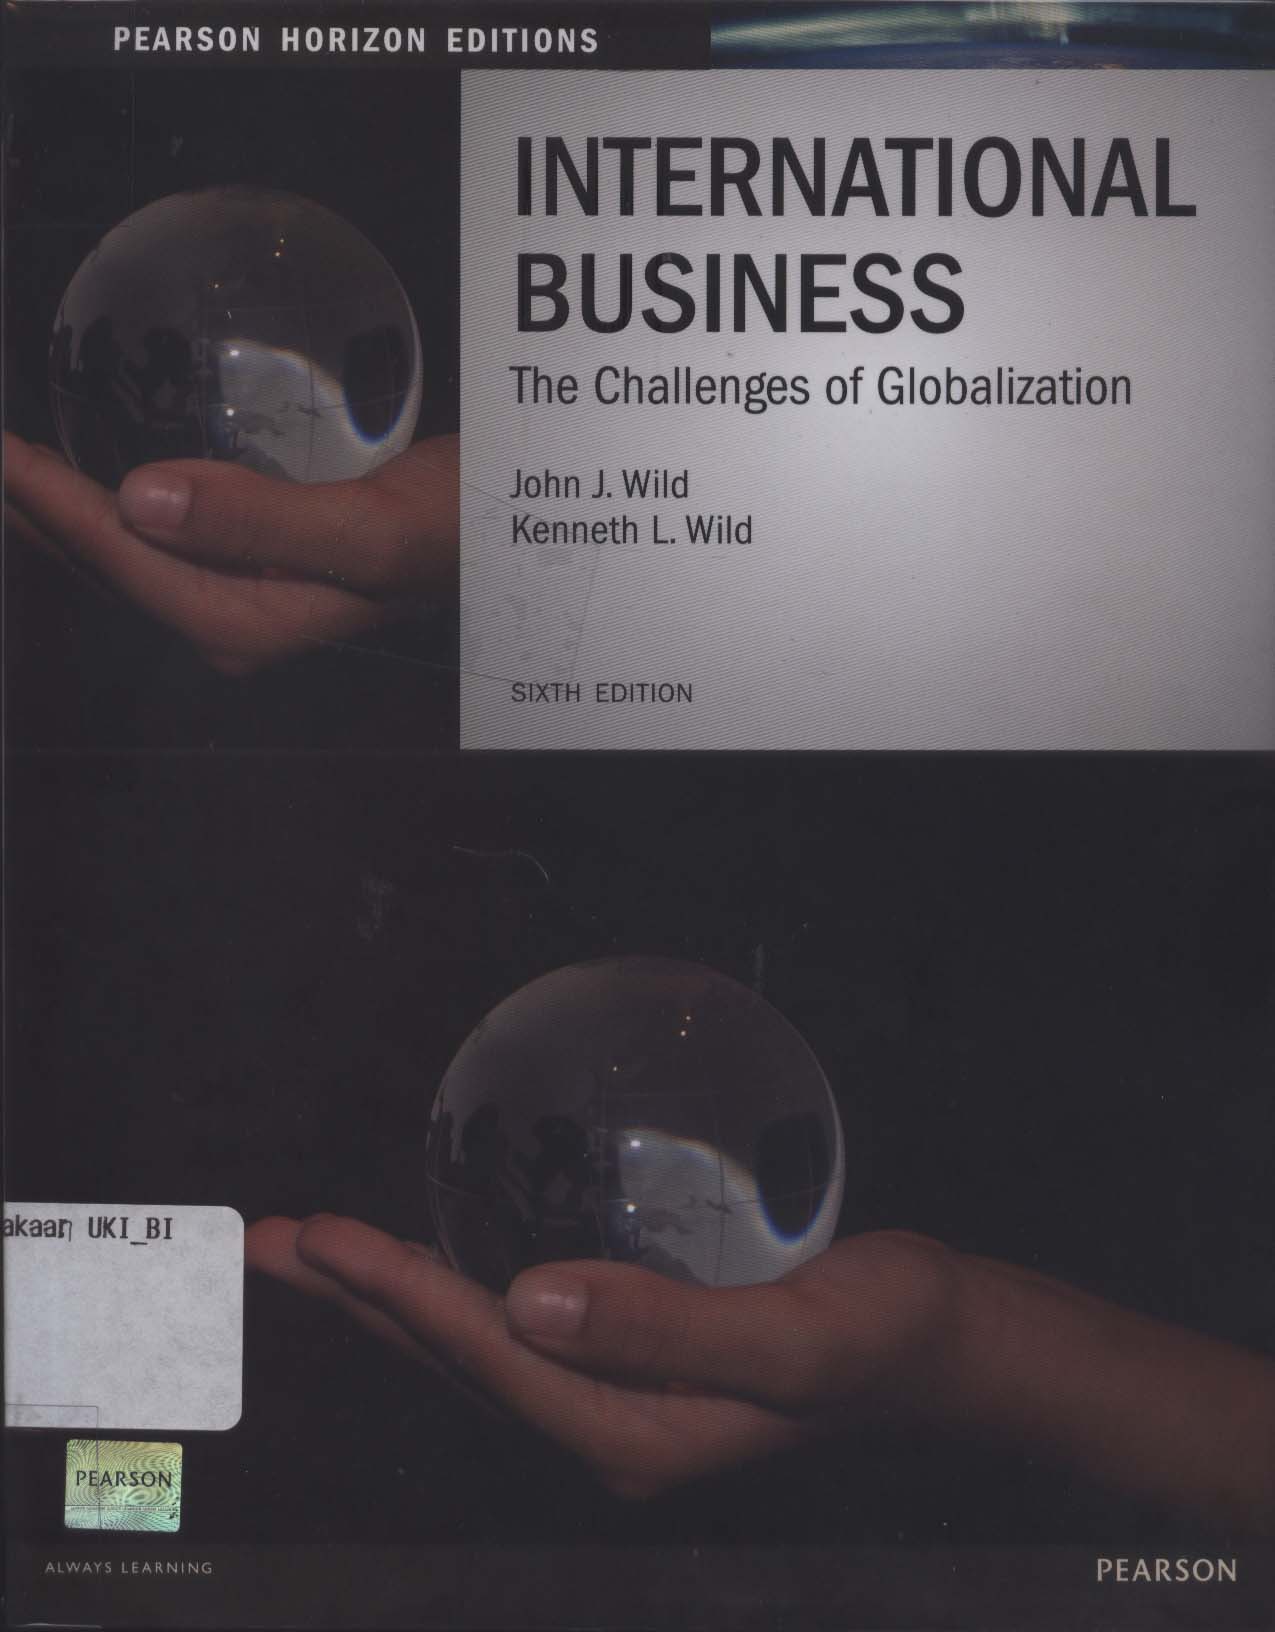 International business: the challenges of globalization